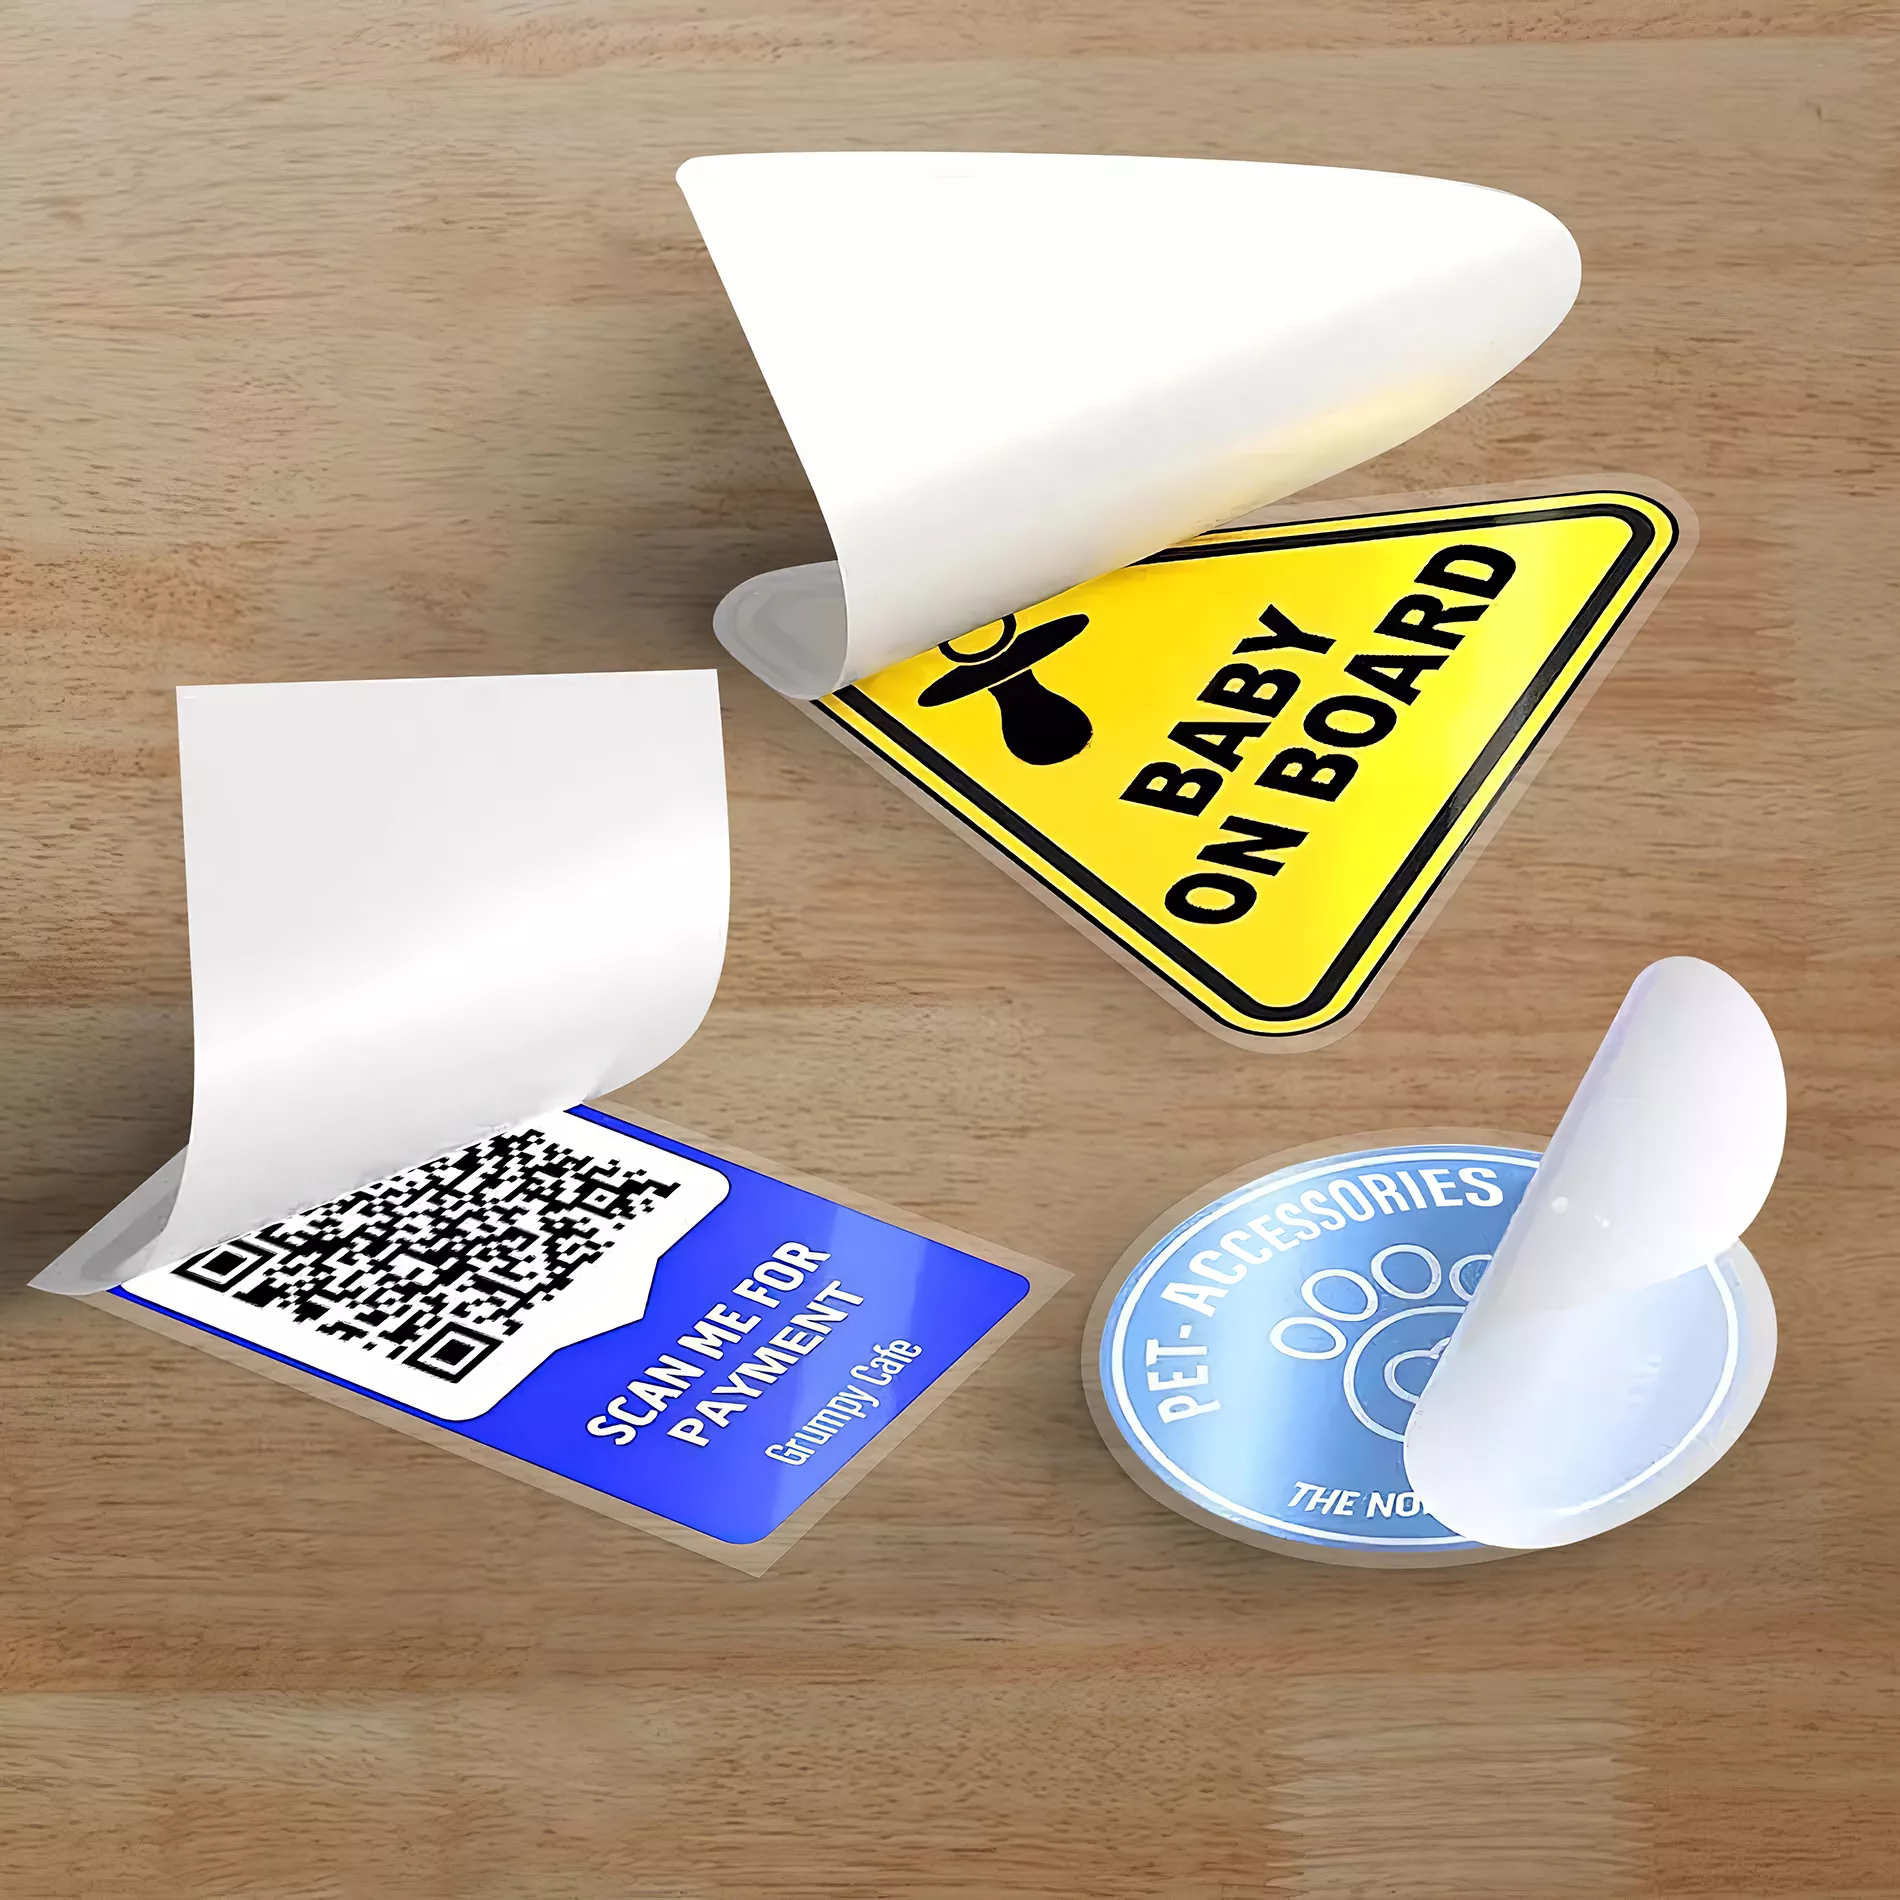 Front adhesive Stickers - Custom Stickers - Make Custom Stickers Your Way